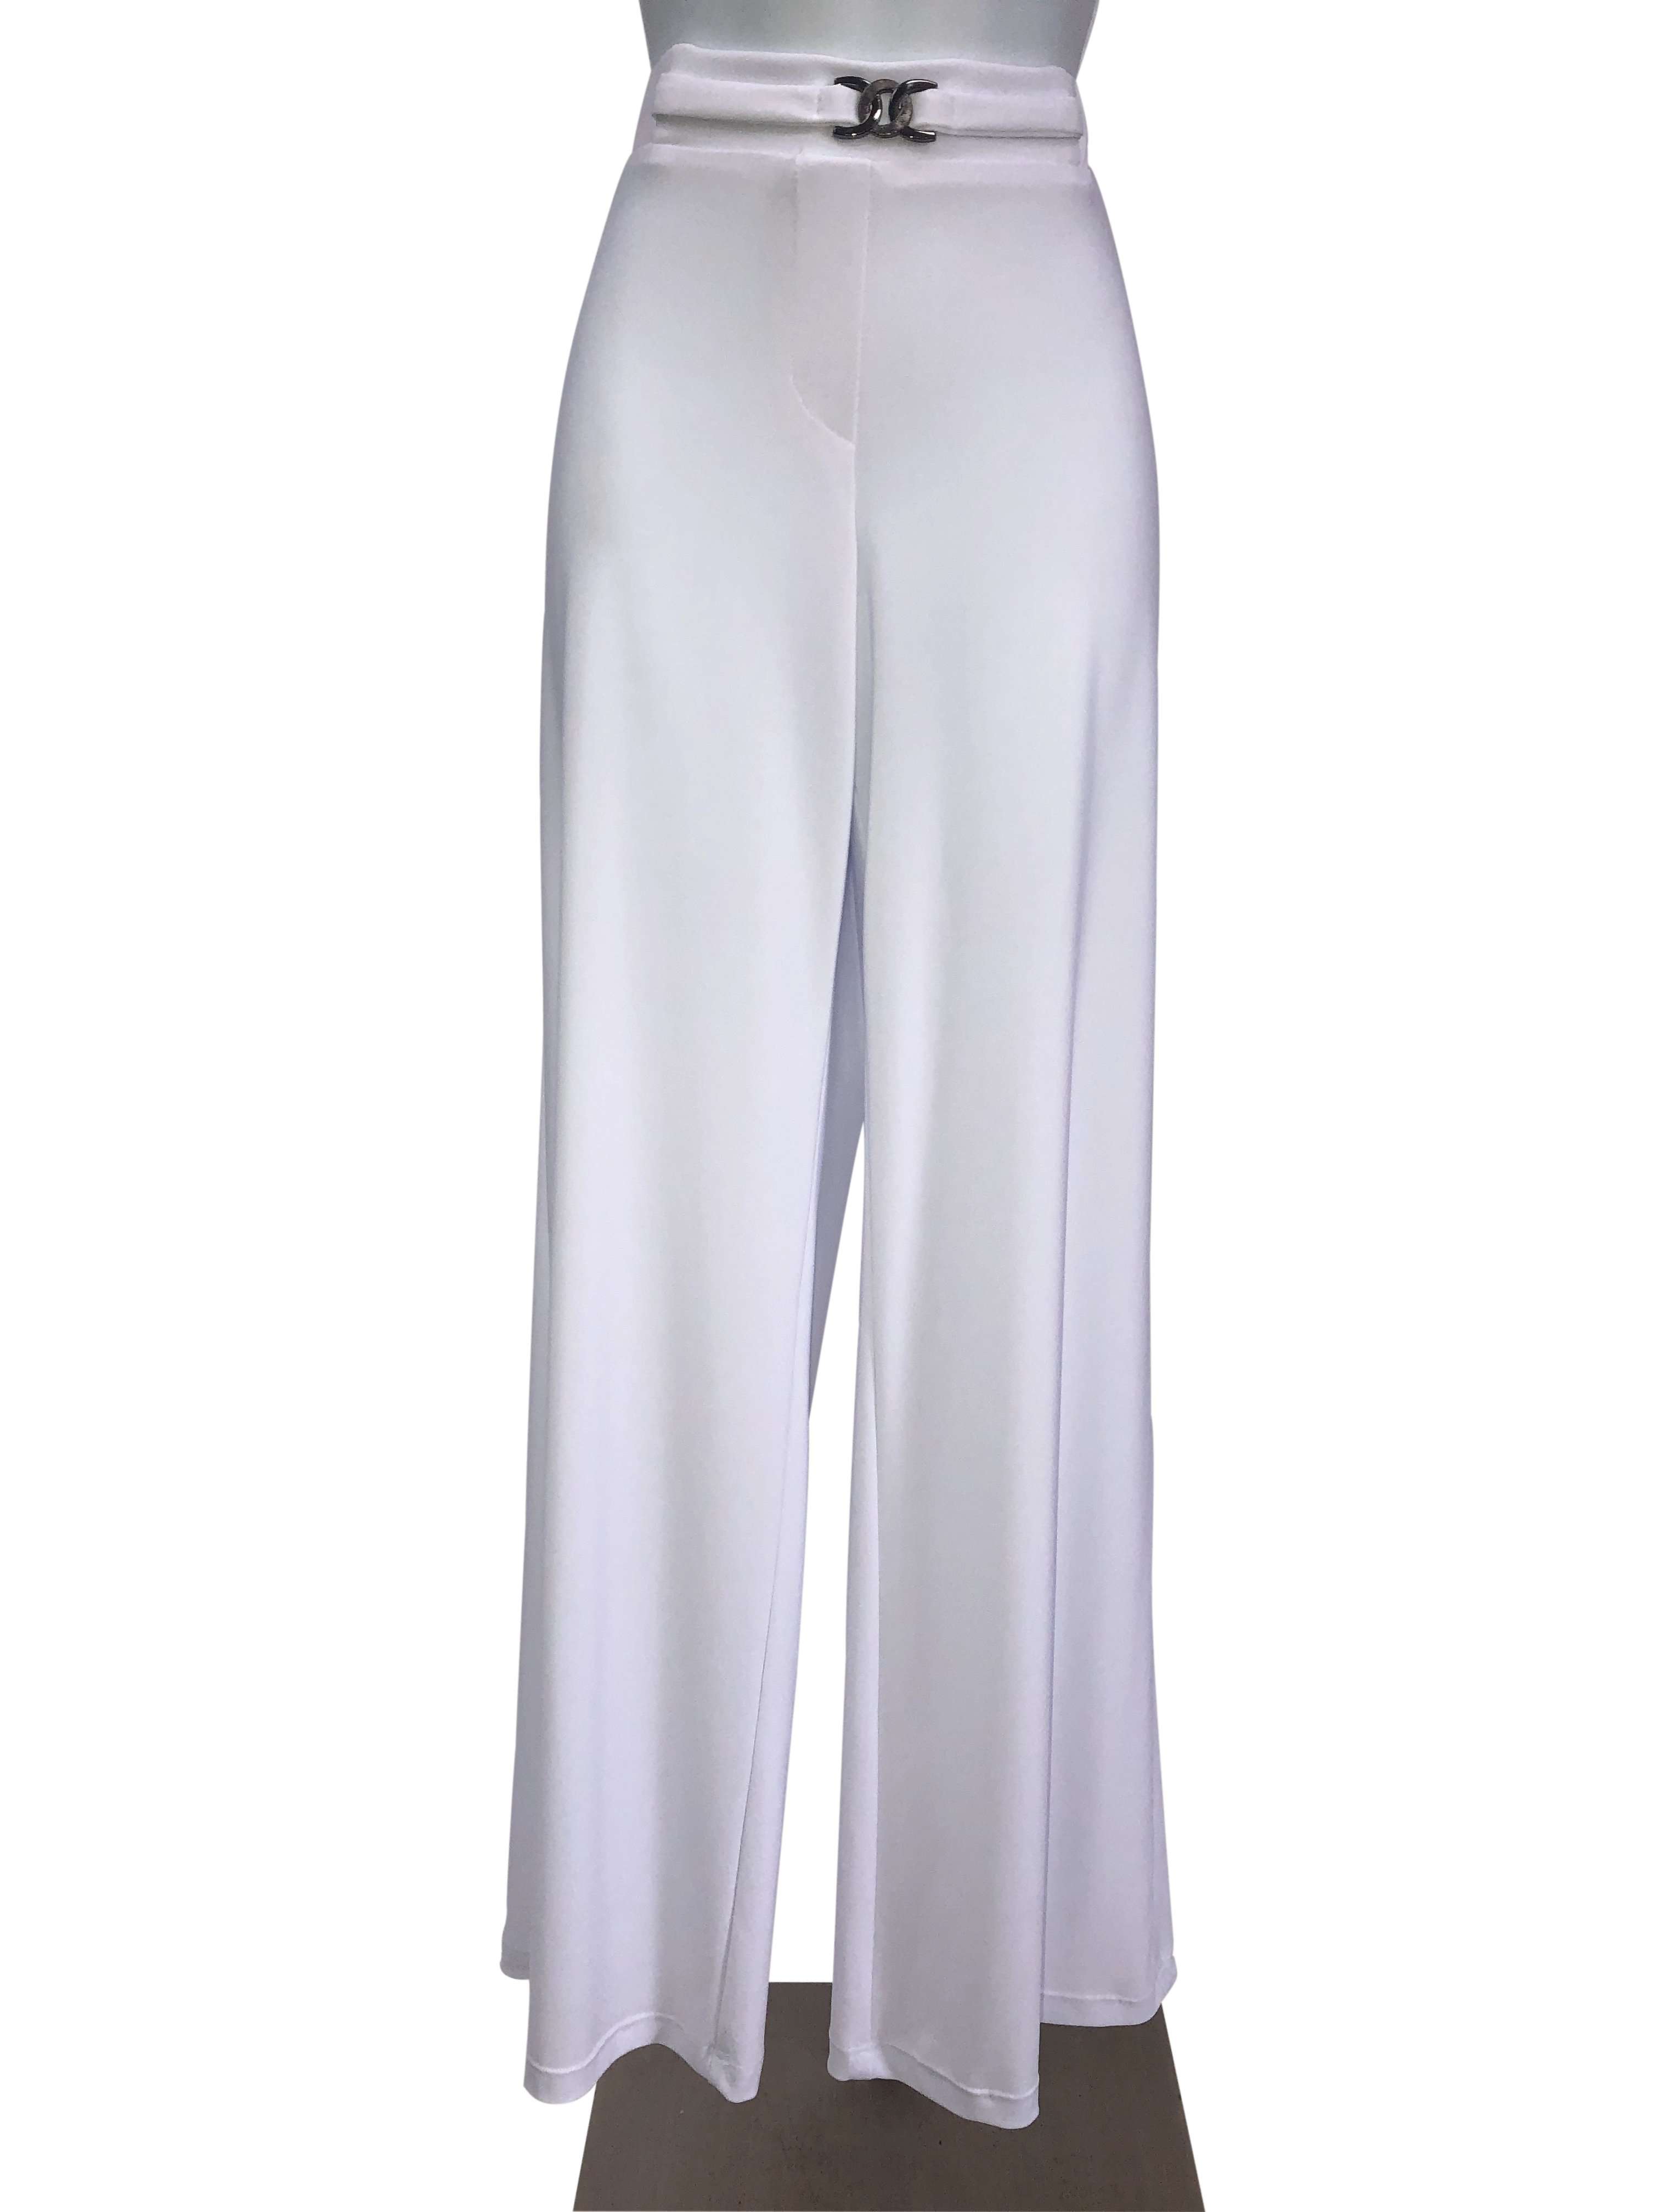 Women's Pants White Palazzo Pant "Magic Pant " Our Beast Seller for over 5 Years Quality Made in Canada - Yvonne Marie - Yvonne Marie